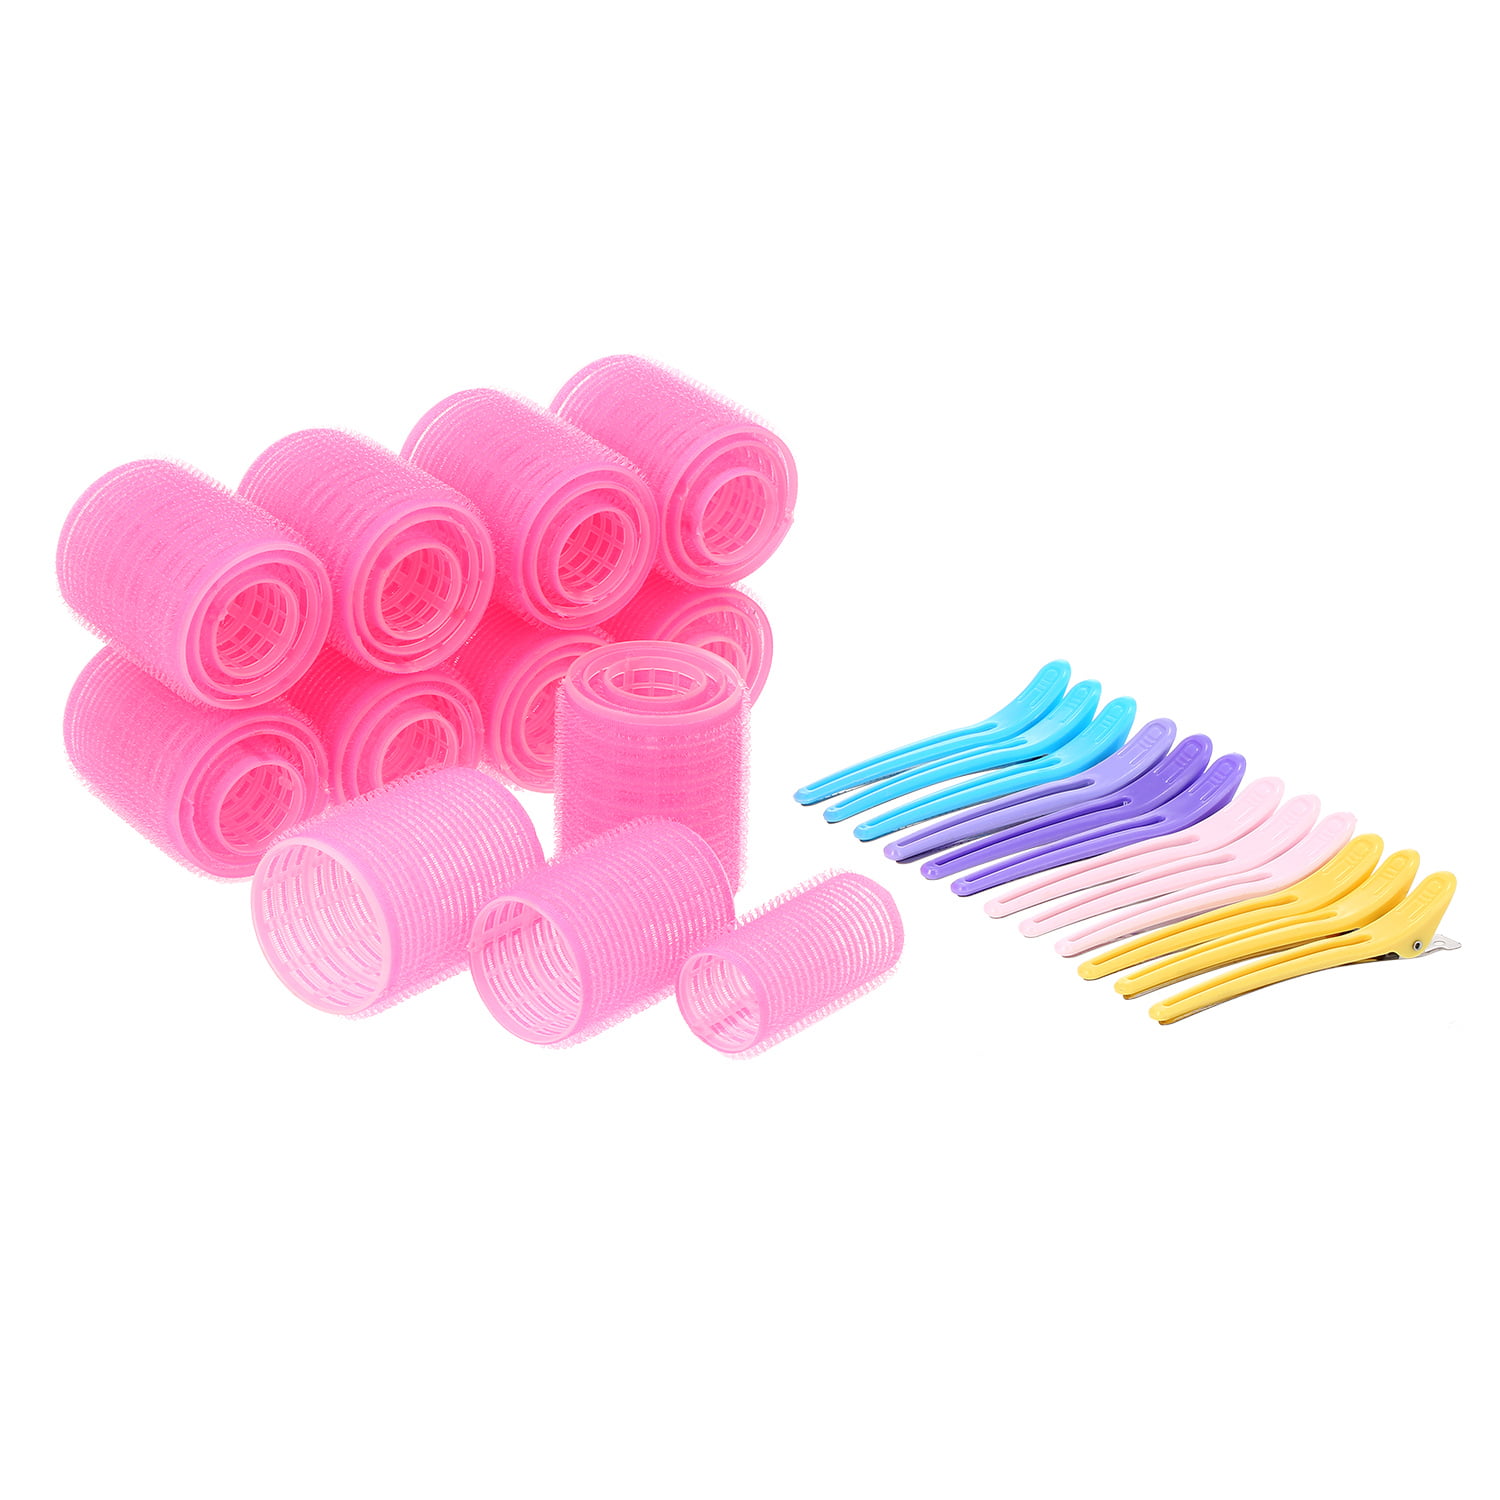 Details about  / Hair Slides Ice Lollipops Hair Grip Clip Set Gift Girls Novelty Pink Yellow Blue